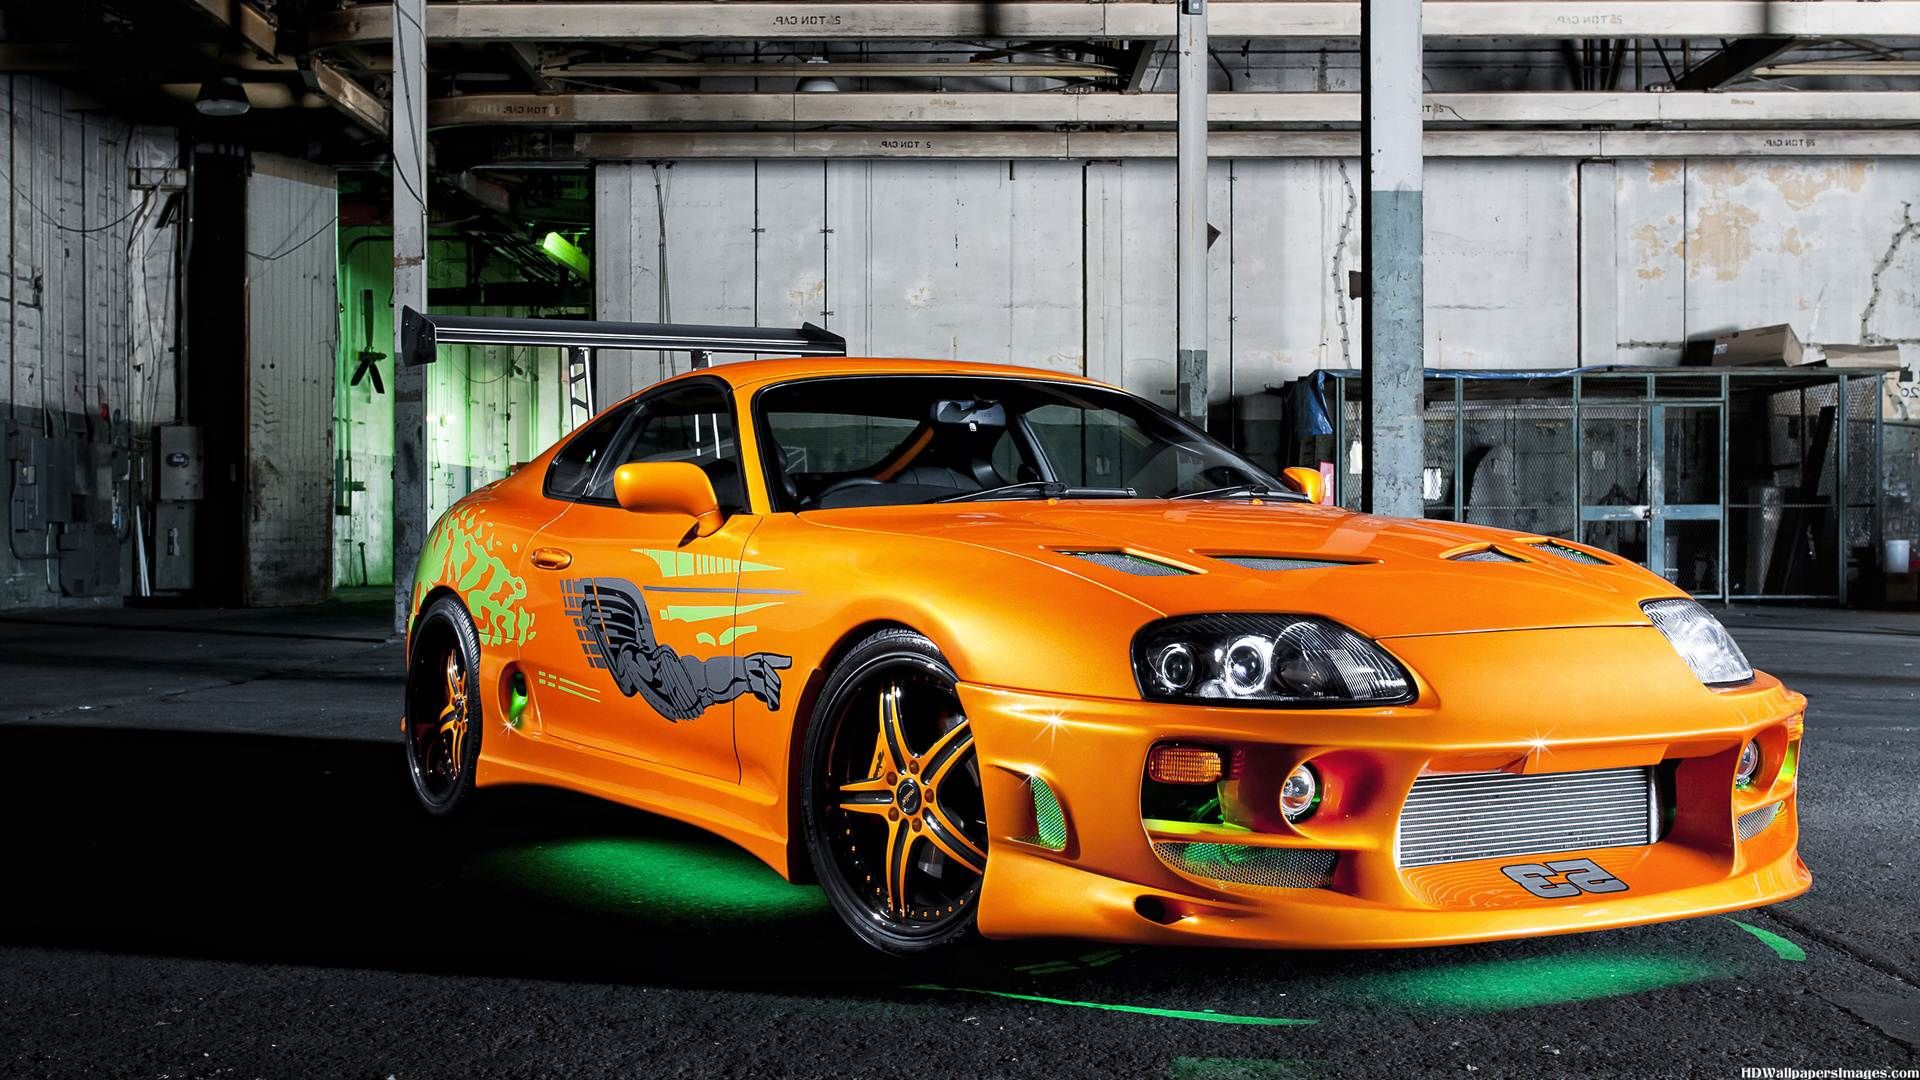 Toyota Supra Fast And Furious HD Wallpaper 4t4